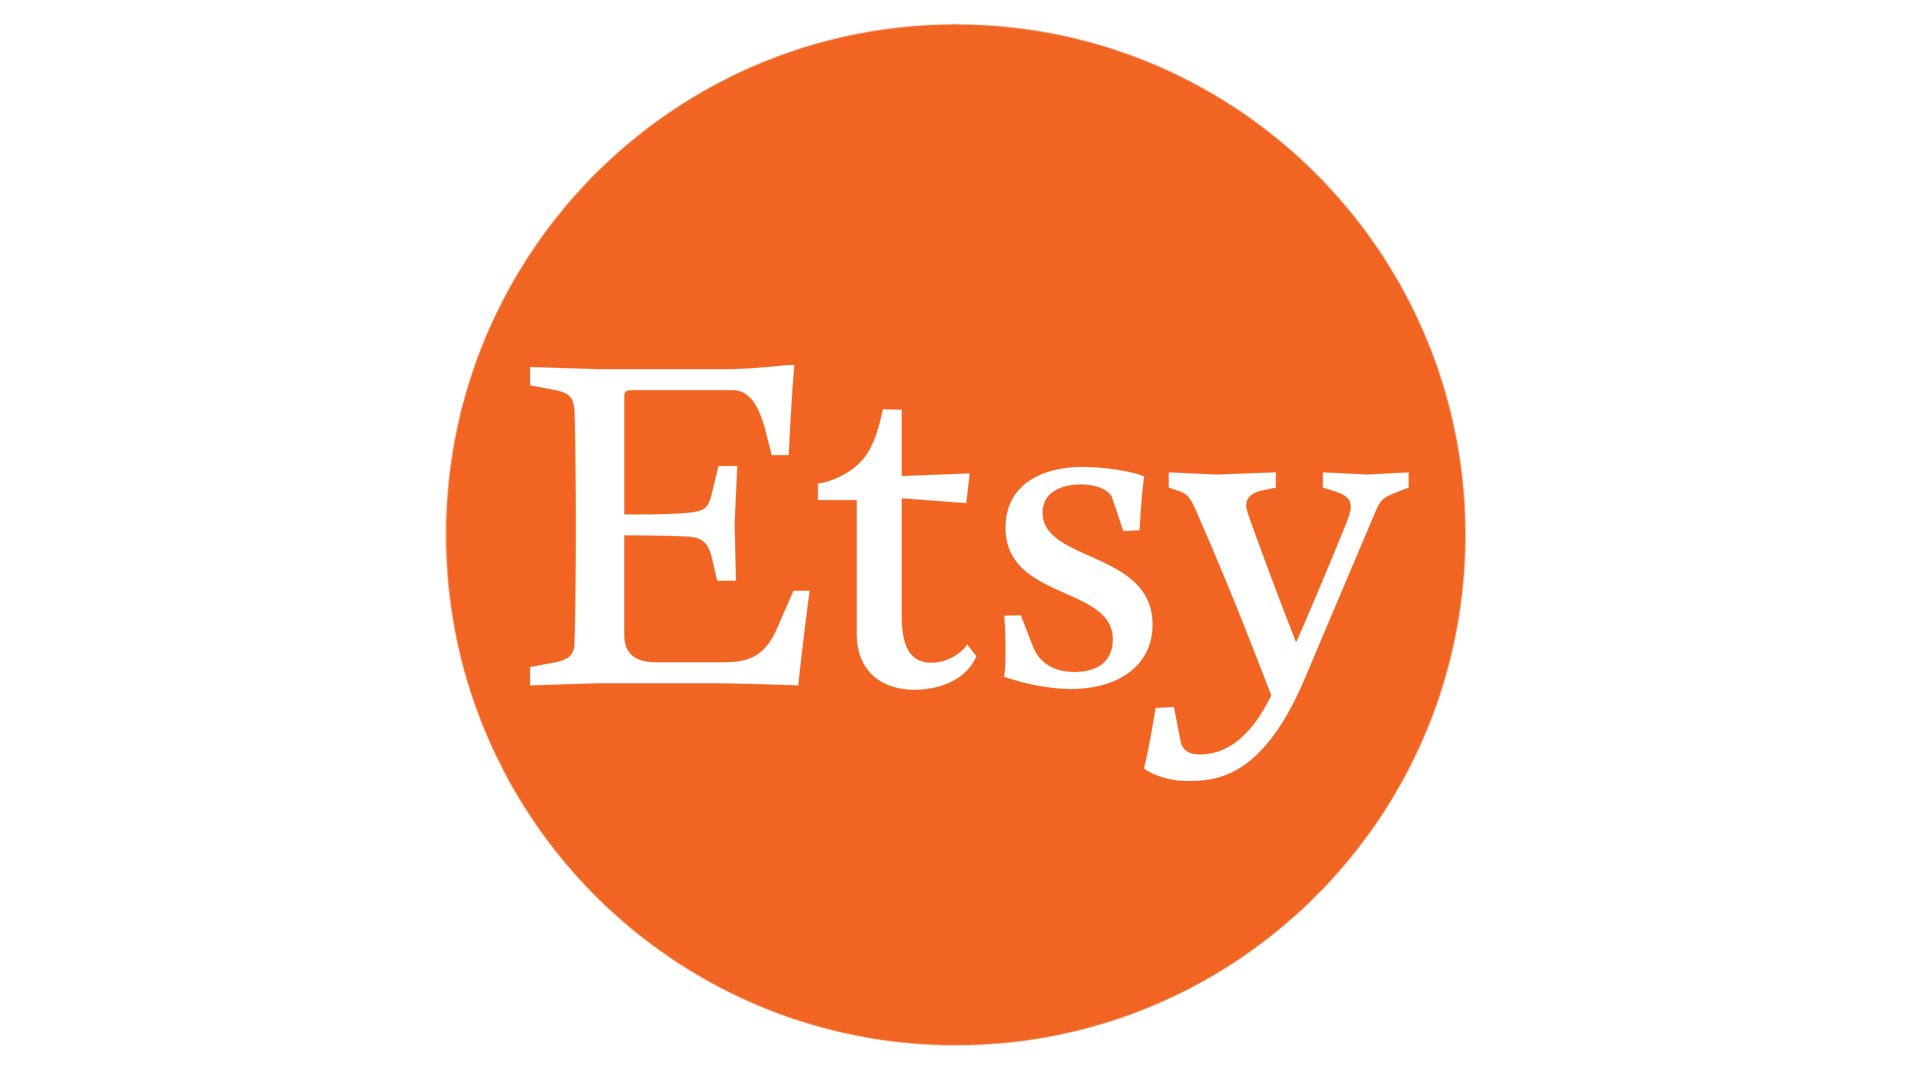 orange circle with the word "Etsy" inside in white